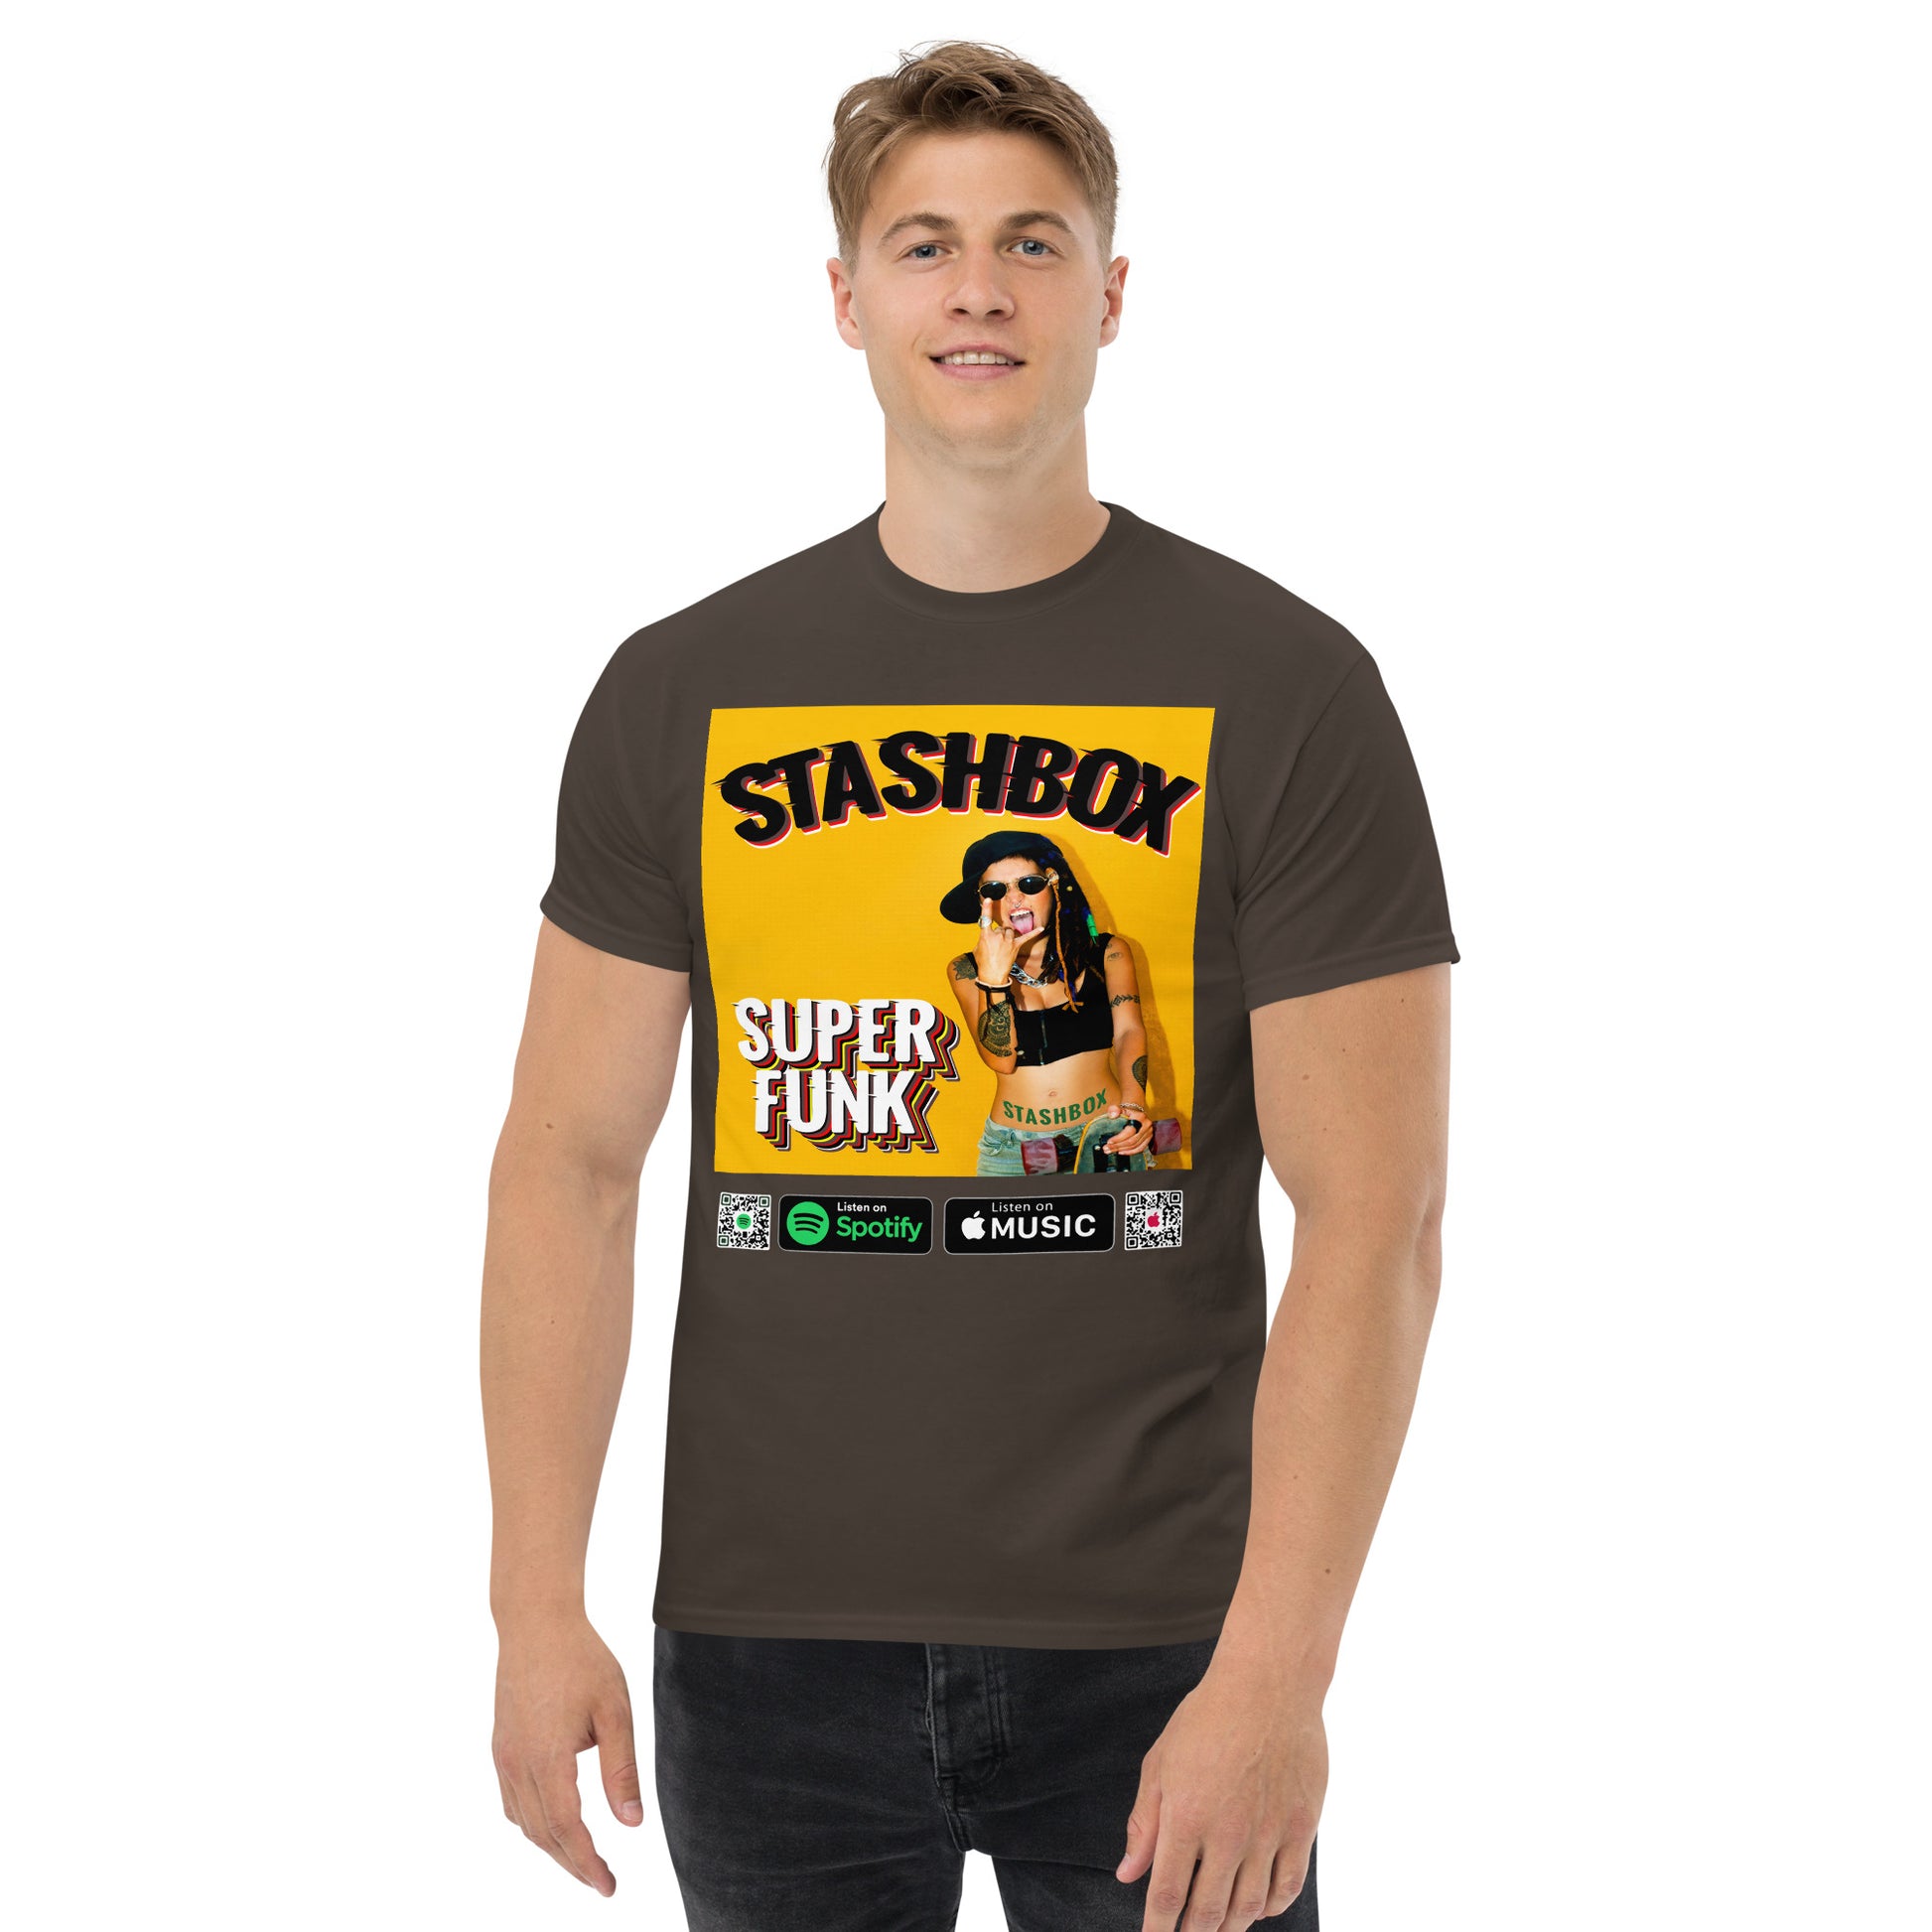 Funk Up Your Wardrobe: Super Funk Men's Classic Tee by Stashbox. Elevate your fashion game with the essence of funk. This tee captures the funky spirit, making it a must-have for music enthusiasts. Let your wardrobe groove. #FunkyTeeStyle #MusicFueledFashion #StashboxGroove